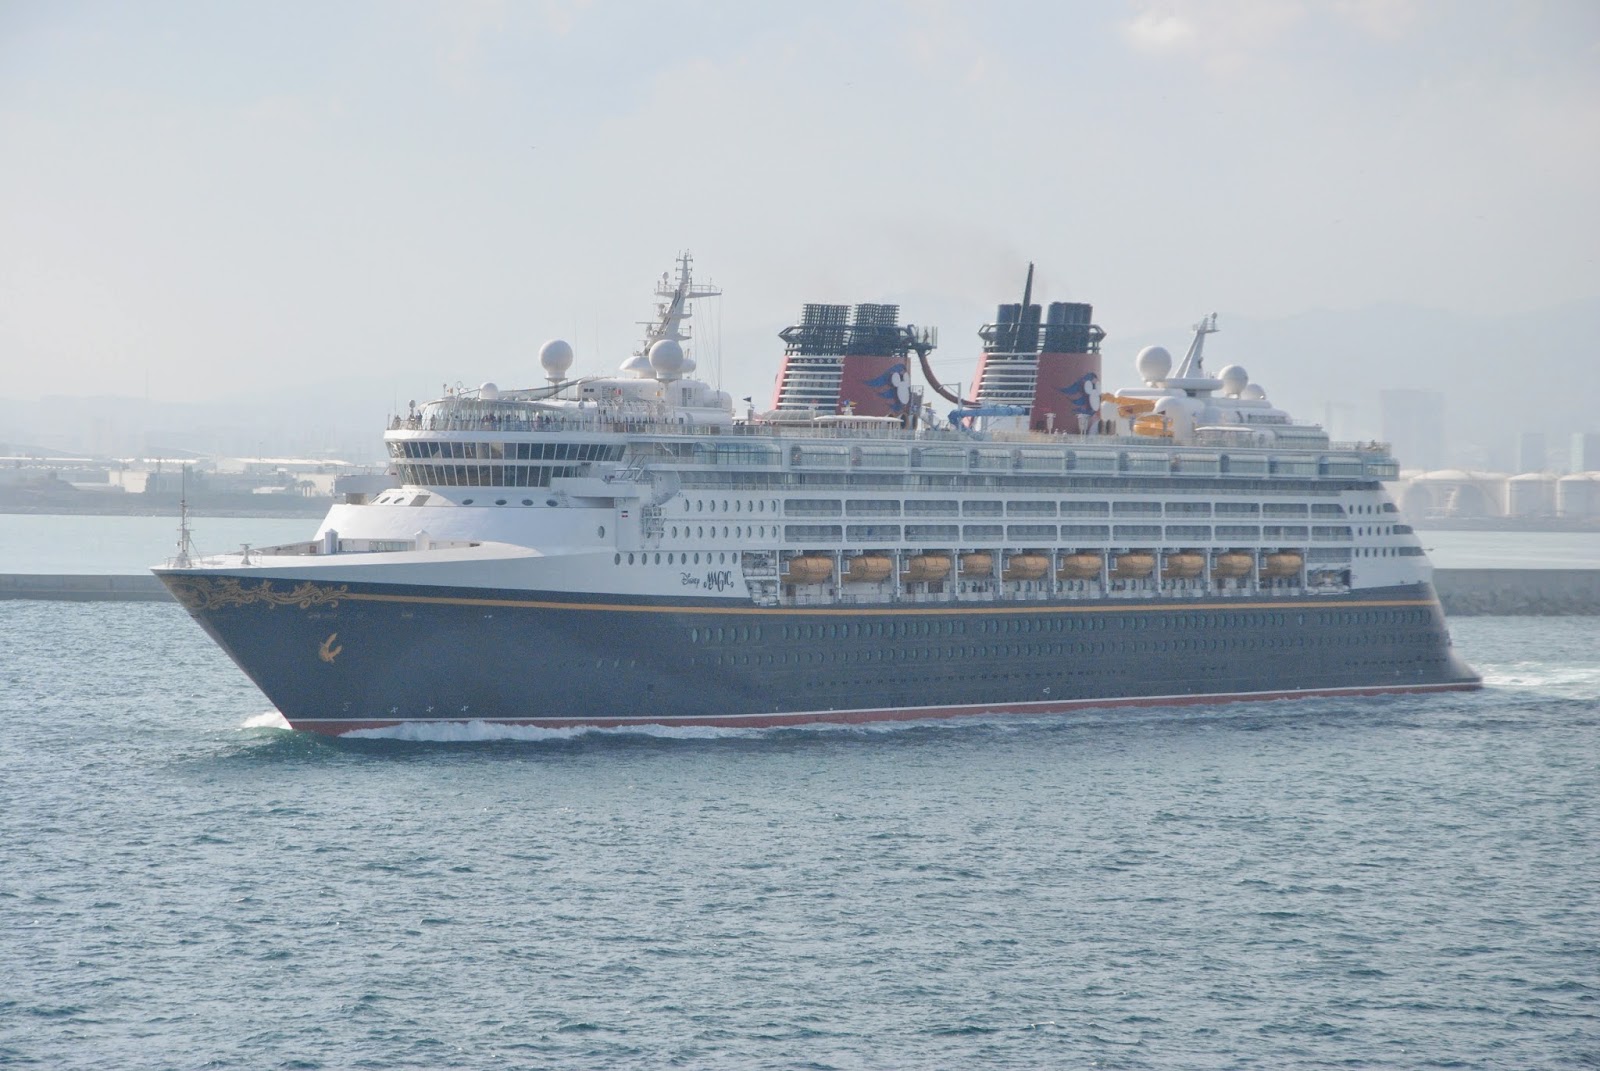 DISNEY MAGIC and SOVEREIGN seen from GRIMALDI Cruise Ferry "CRUISE